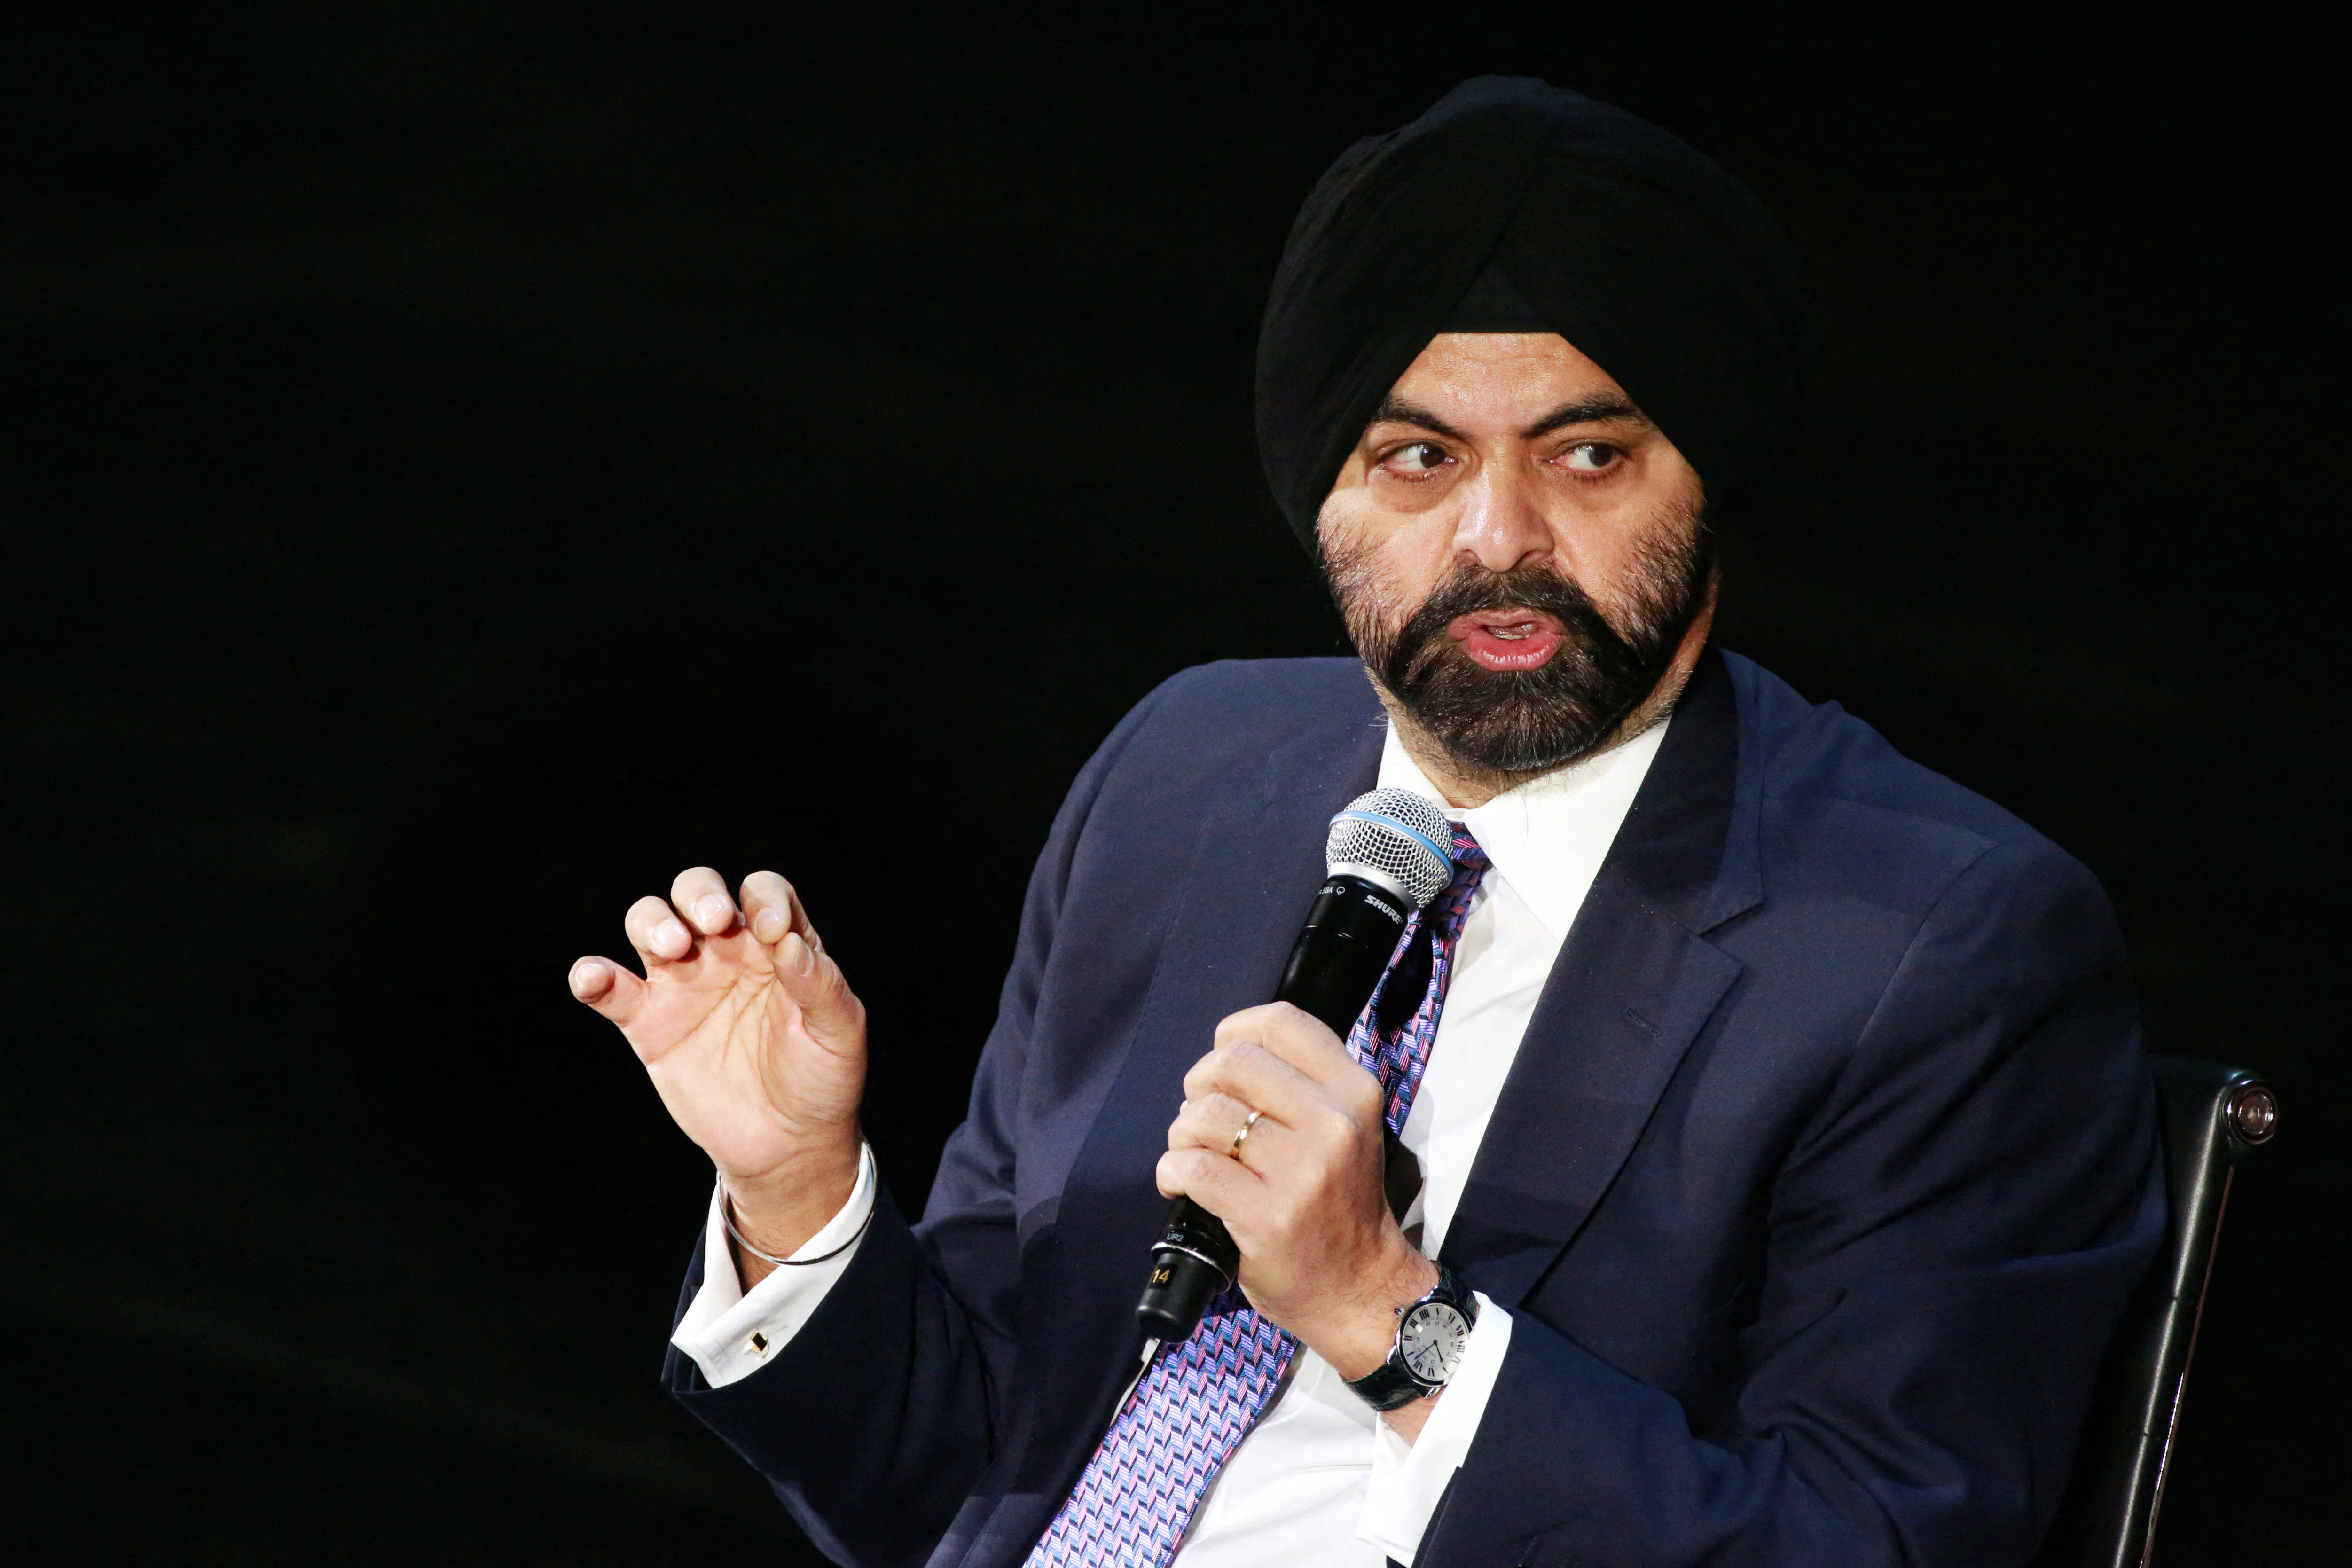 Ajay Banga, CEO of MasterCard, speaks during the Women In The World Summit in the Manhattan borough of New York